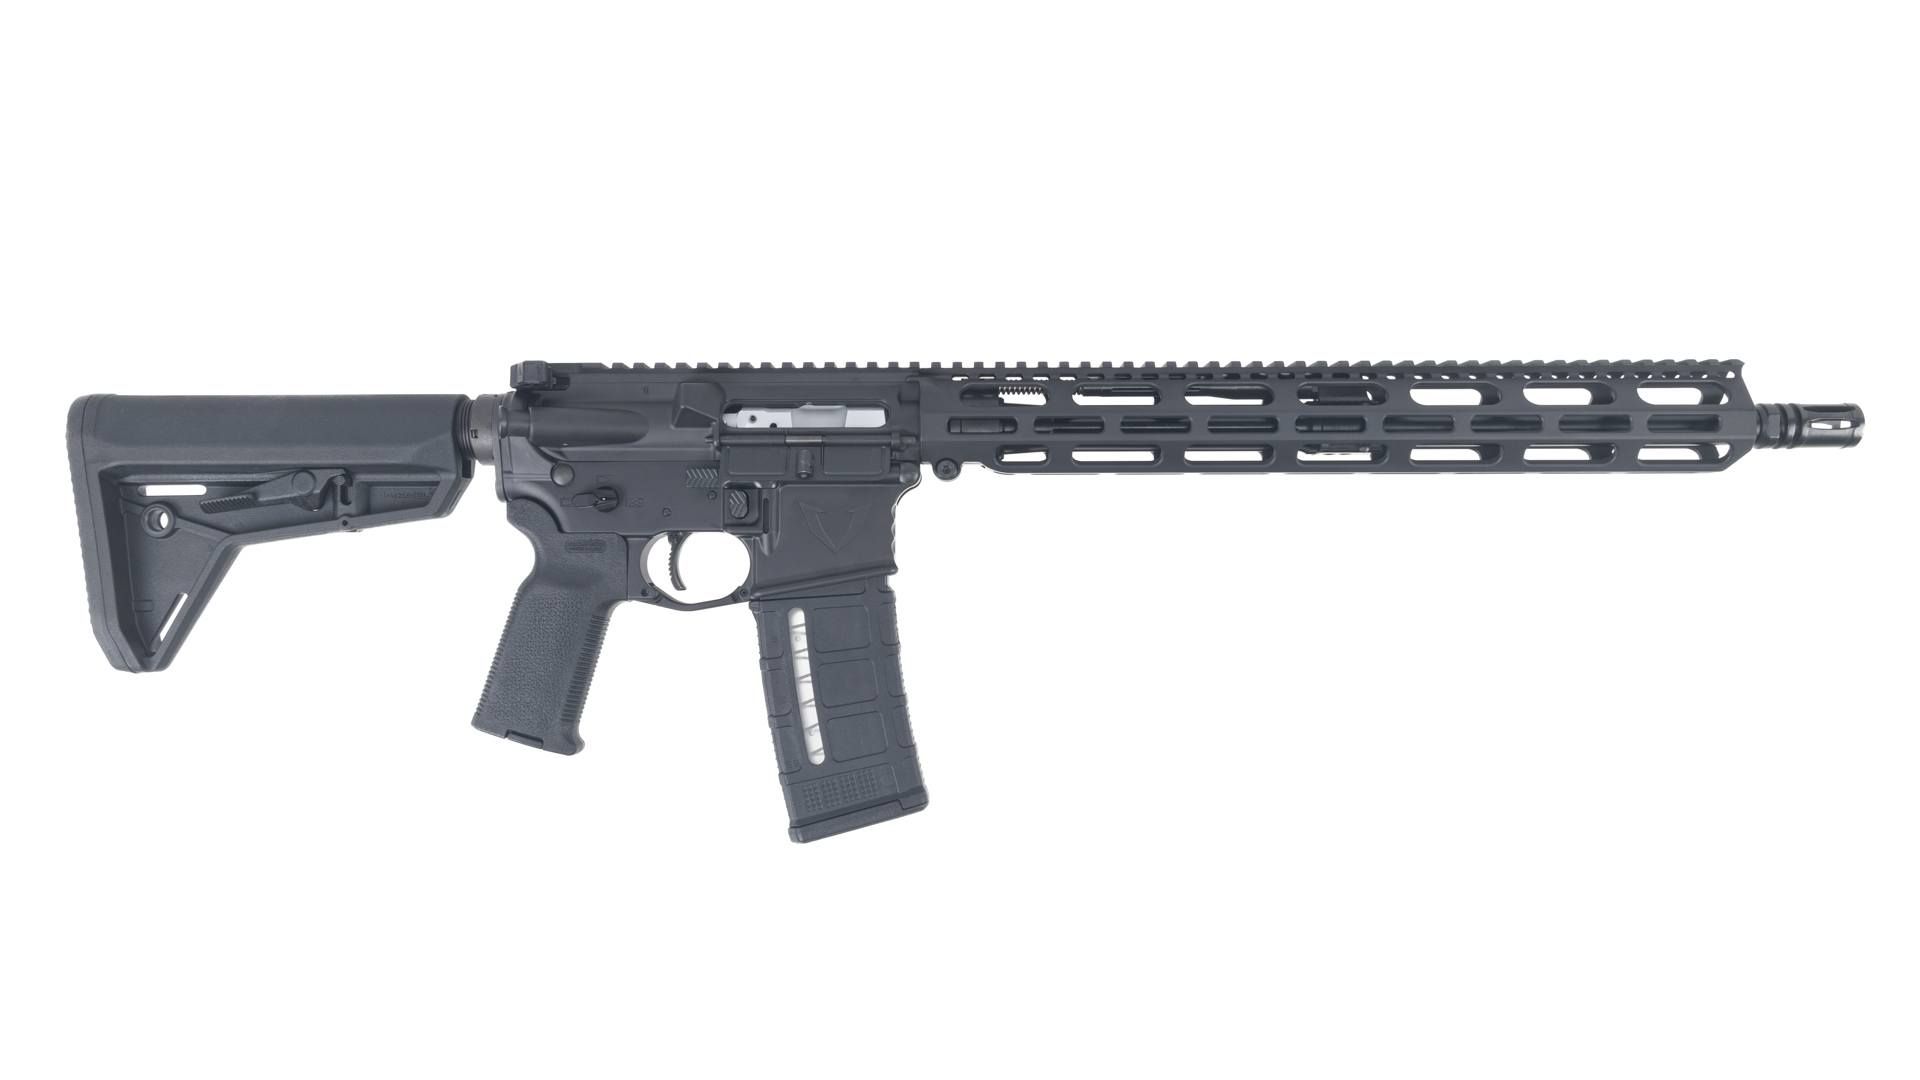 The VKTR Industries VK-1 is an extremely innovative AR 15.